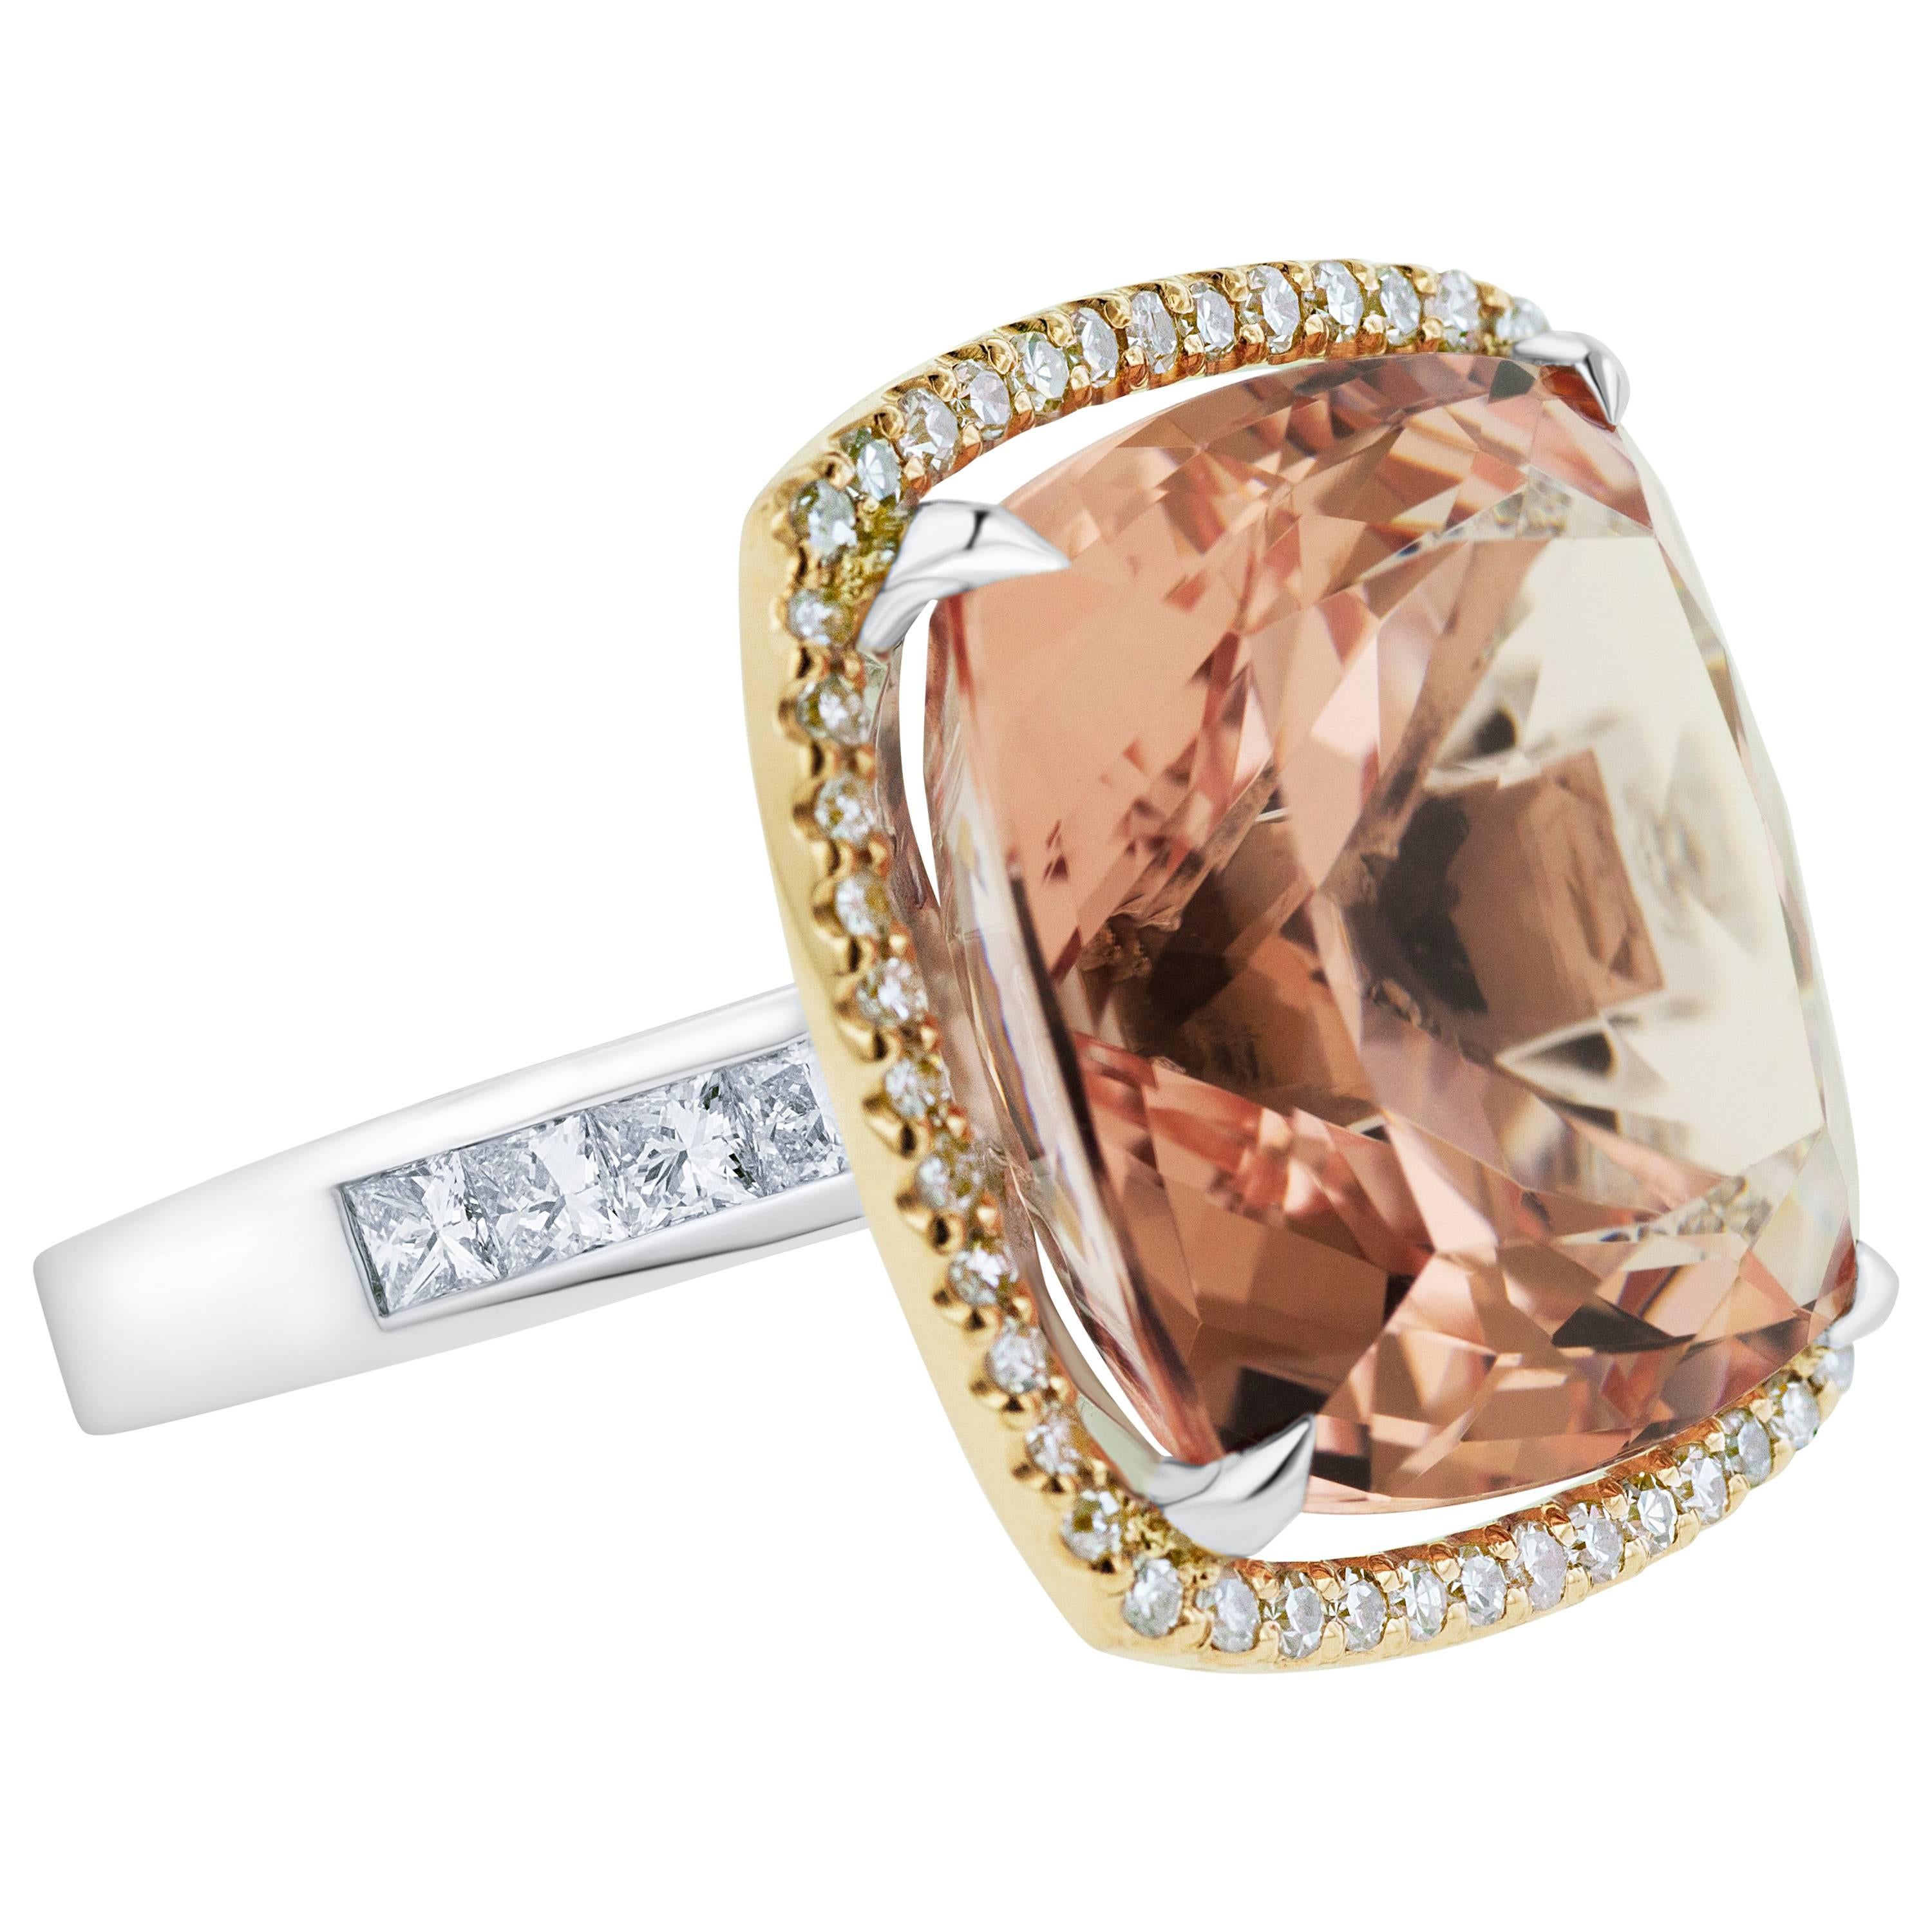 Exclusive 28.49 Carat Pink Morganite Diamond Cocktail Ring For Sale